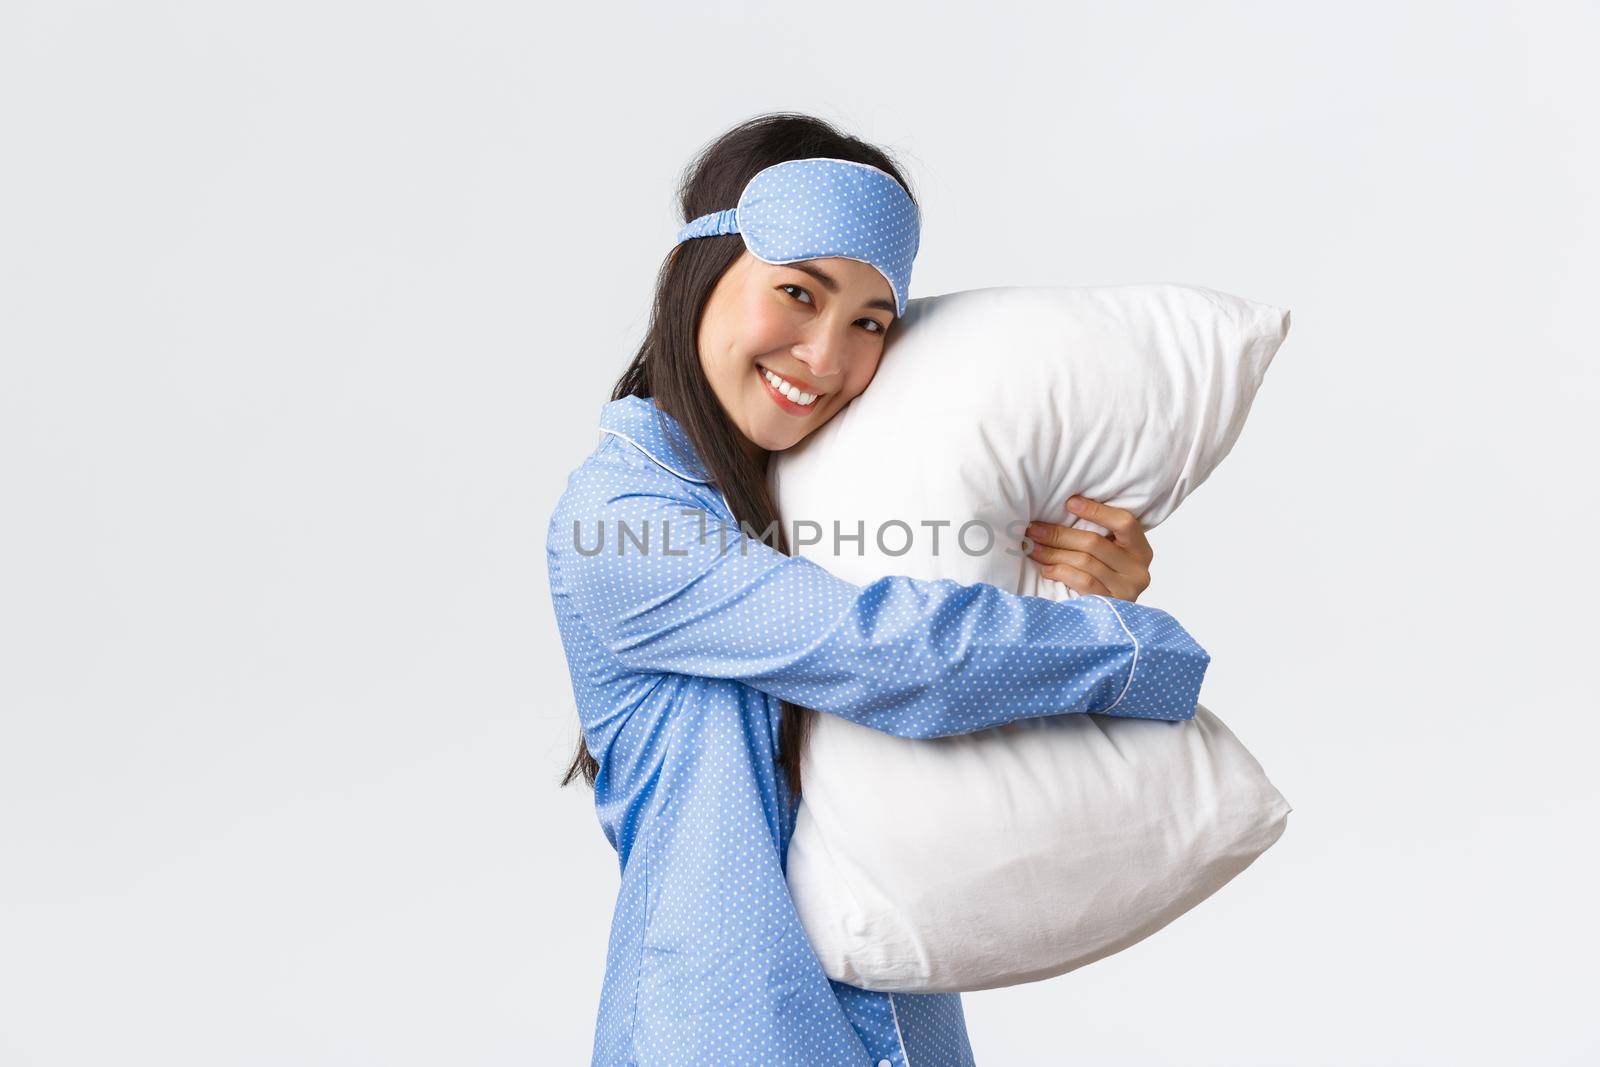 Cute smiling asian girl with clean skin, wearing sleeping mask and pyjama ready for bedtime sleepover party, hugging soft and comfortable pillow as standing over white background dreamy.